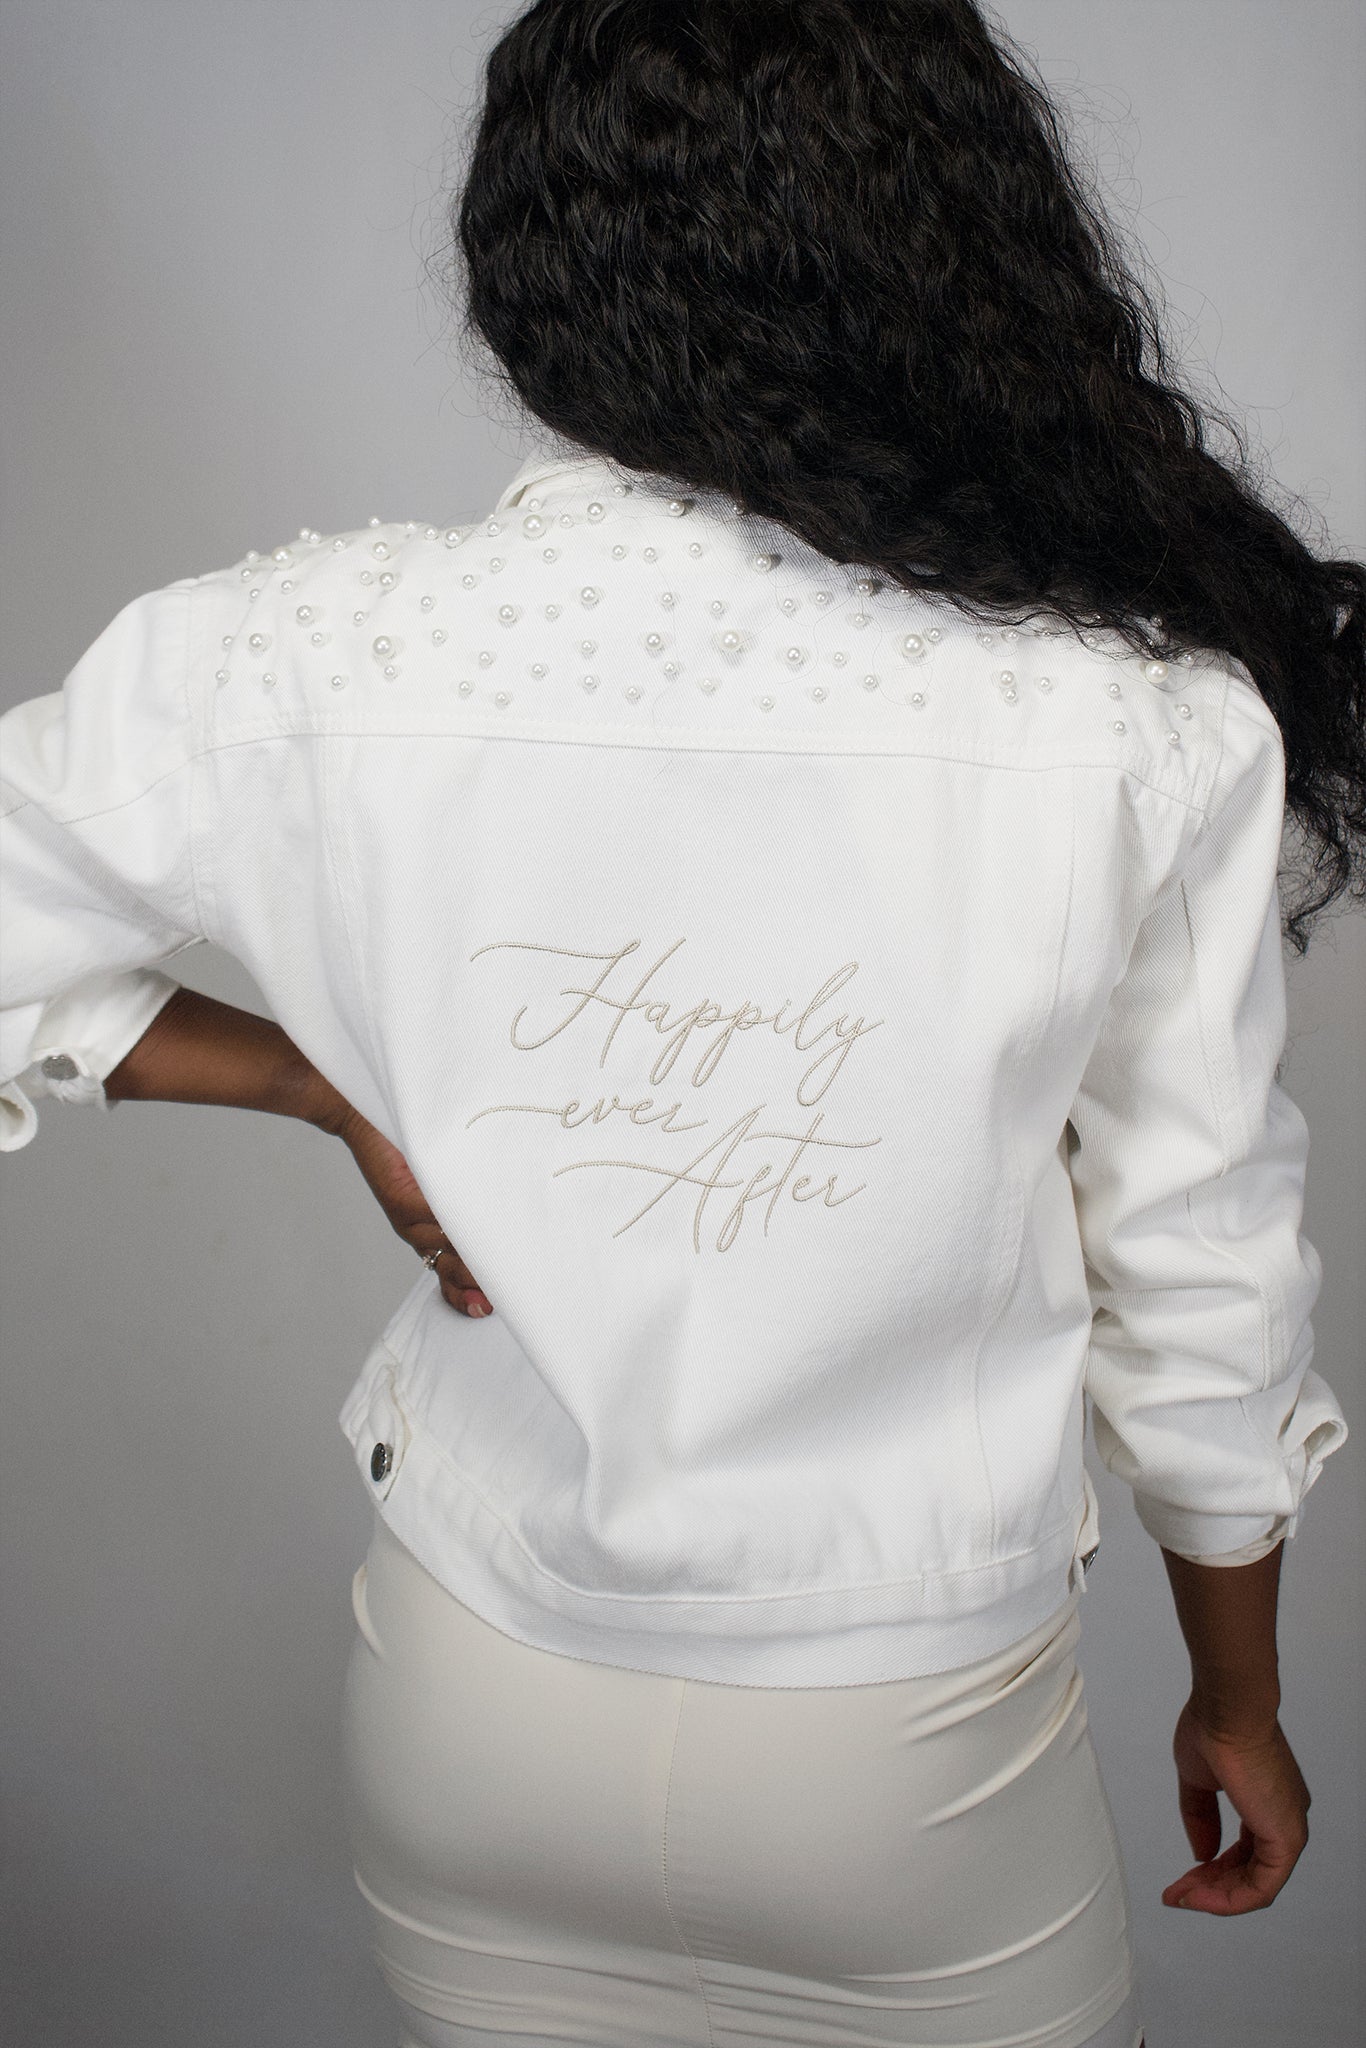 Happily Ever After Jacket